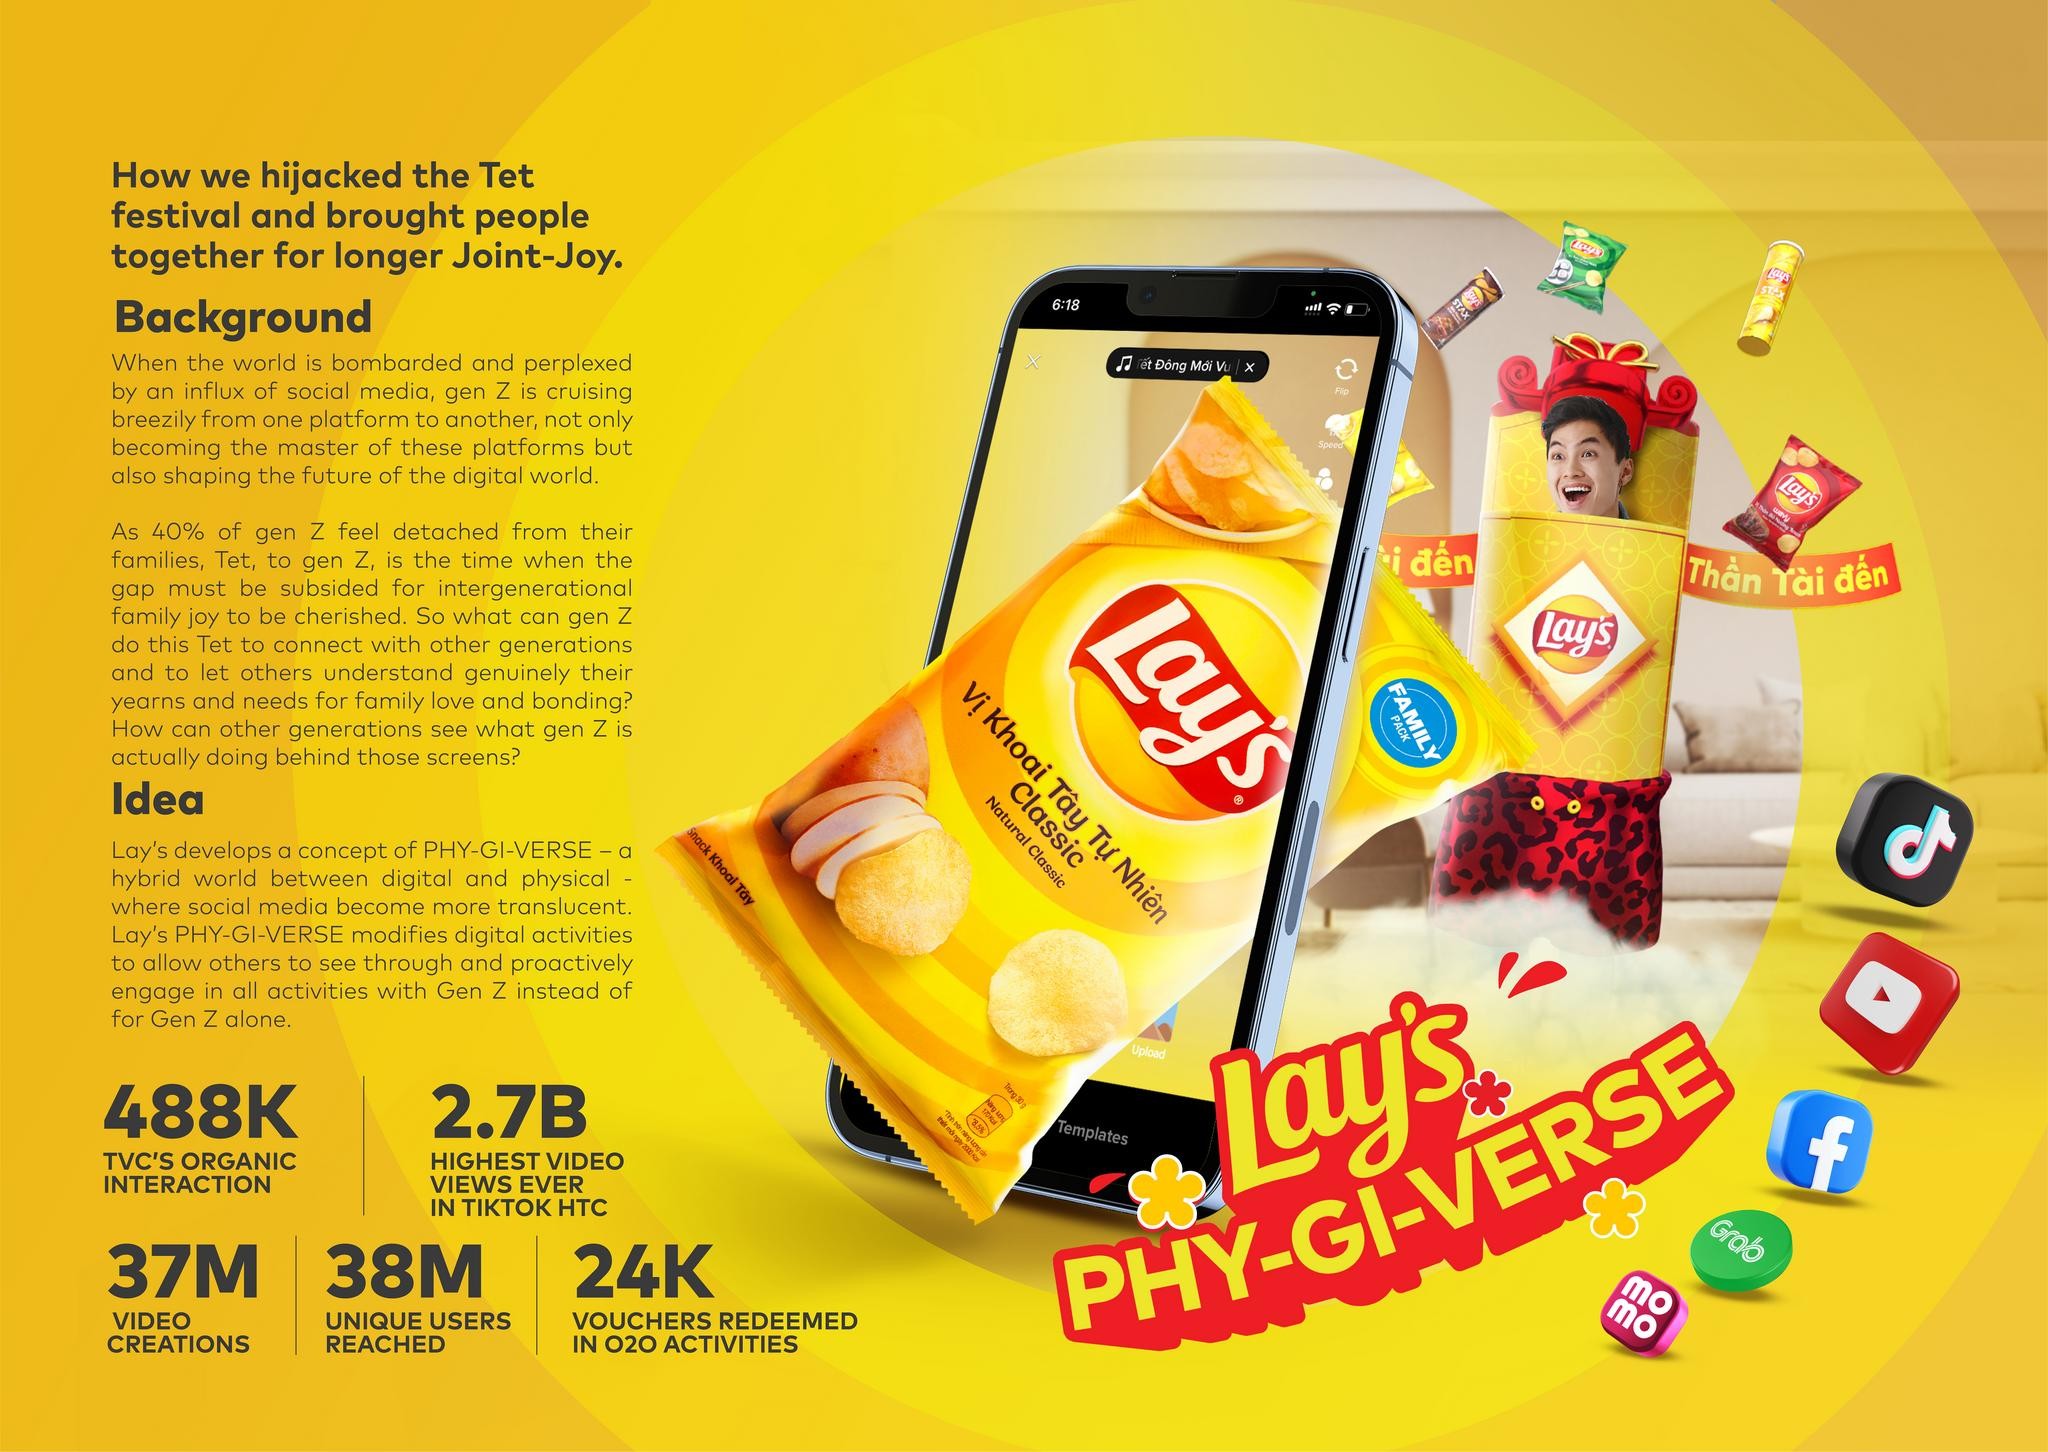 Lay's Phygiverse